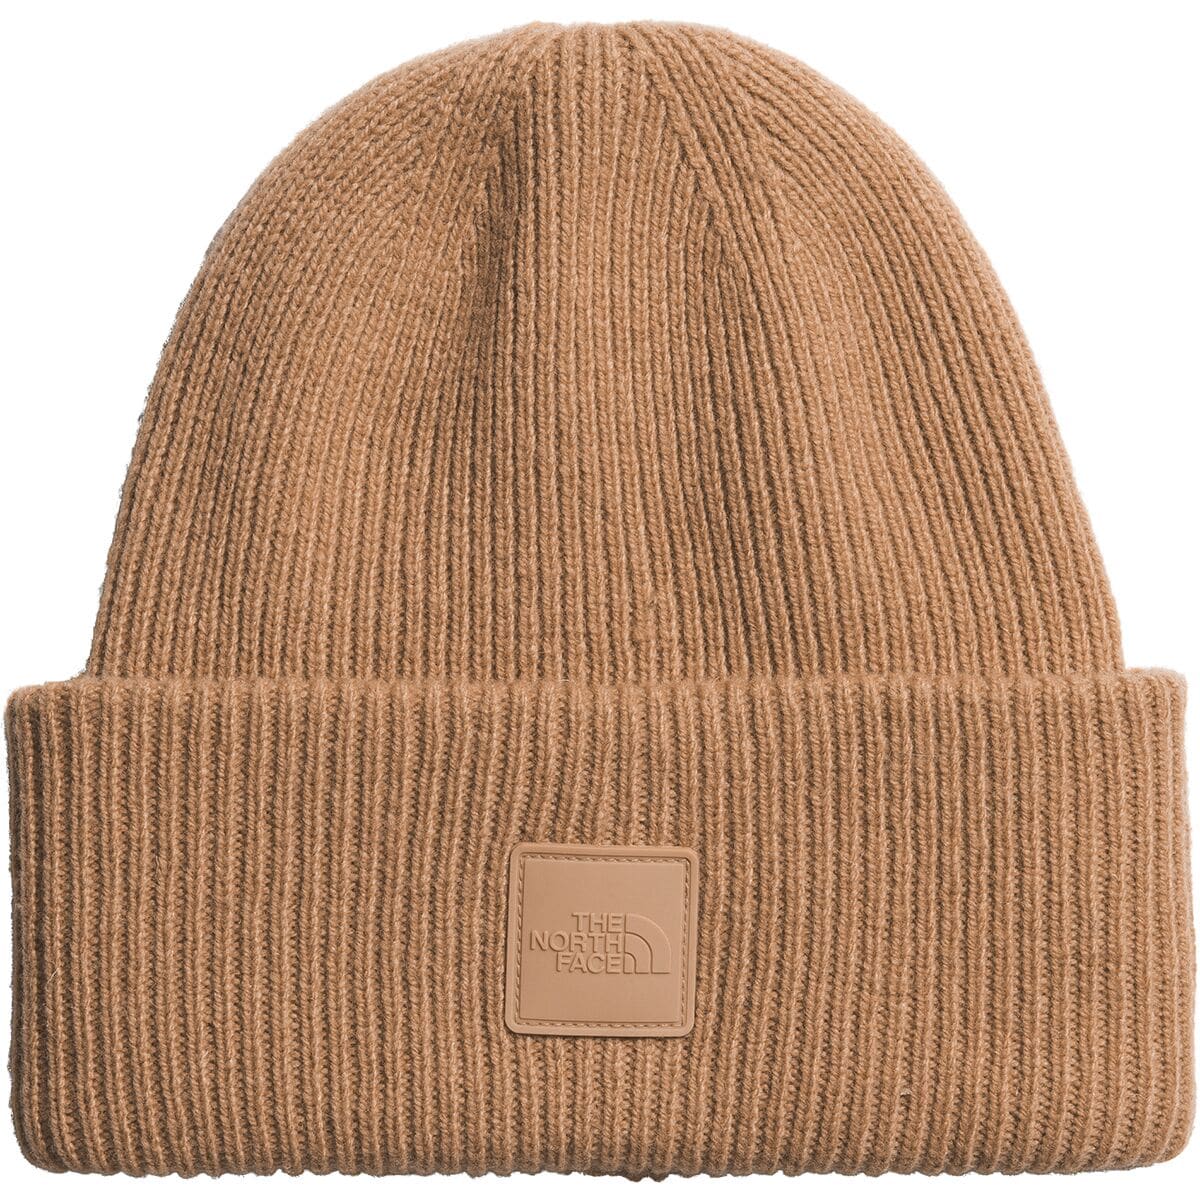 North The Accessories - Urban Beanie Face Patch